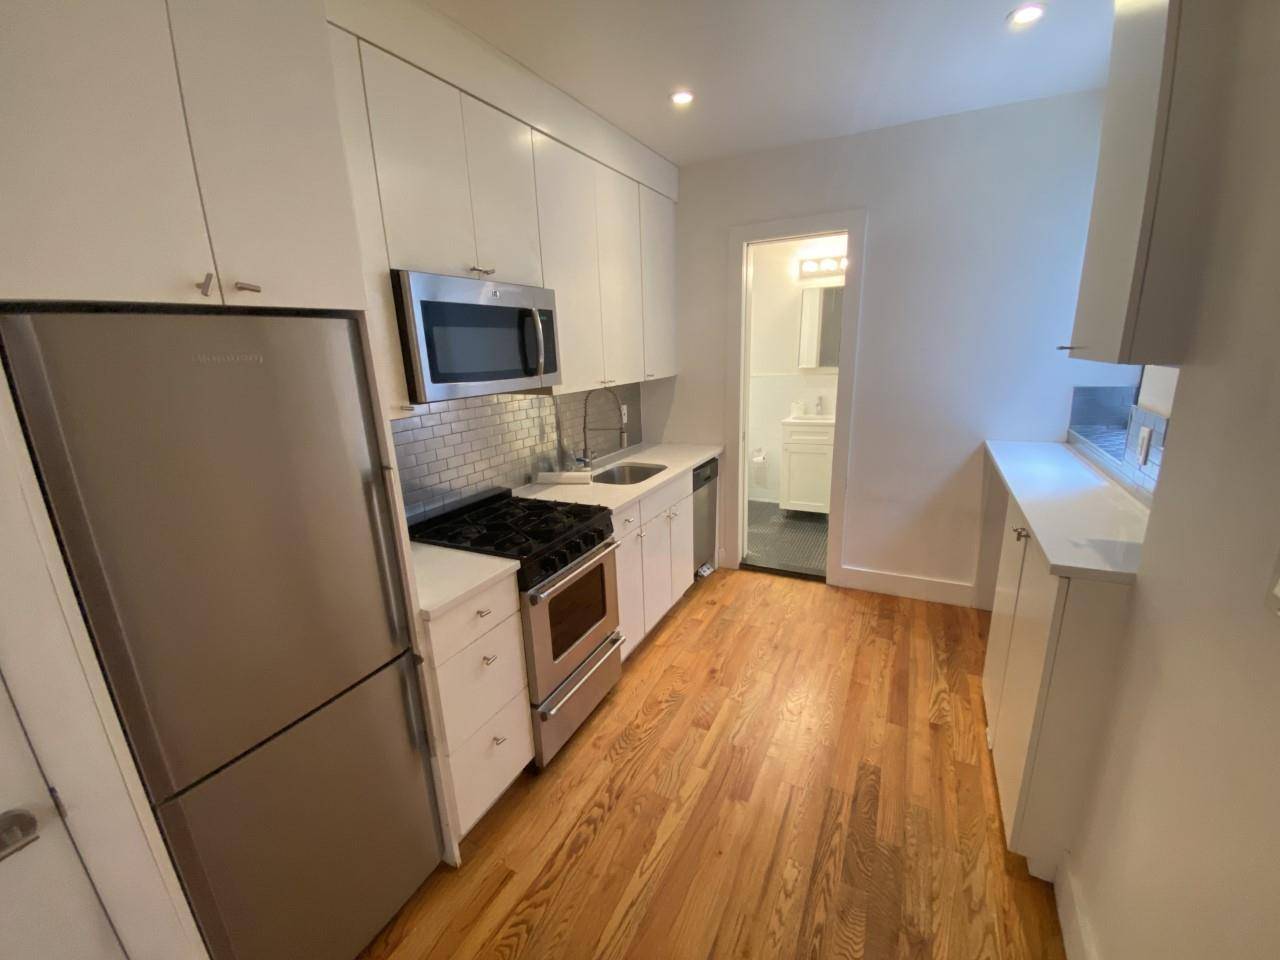 Large Newly Renovated DUPLEX Laundry in unit DishwasherPrime South Park Slope apartment featuring exposed brick, bleached plank floors, custom lacquer white kitchen with stainless steel appliances and a brand new ...